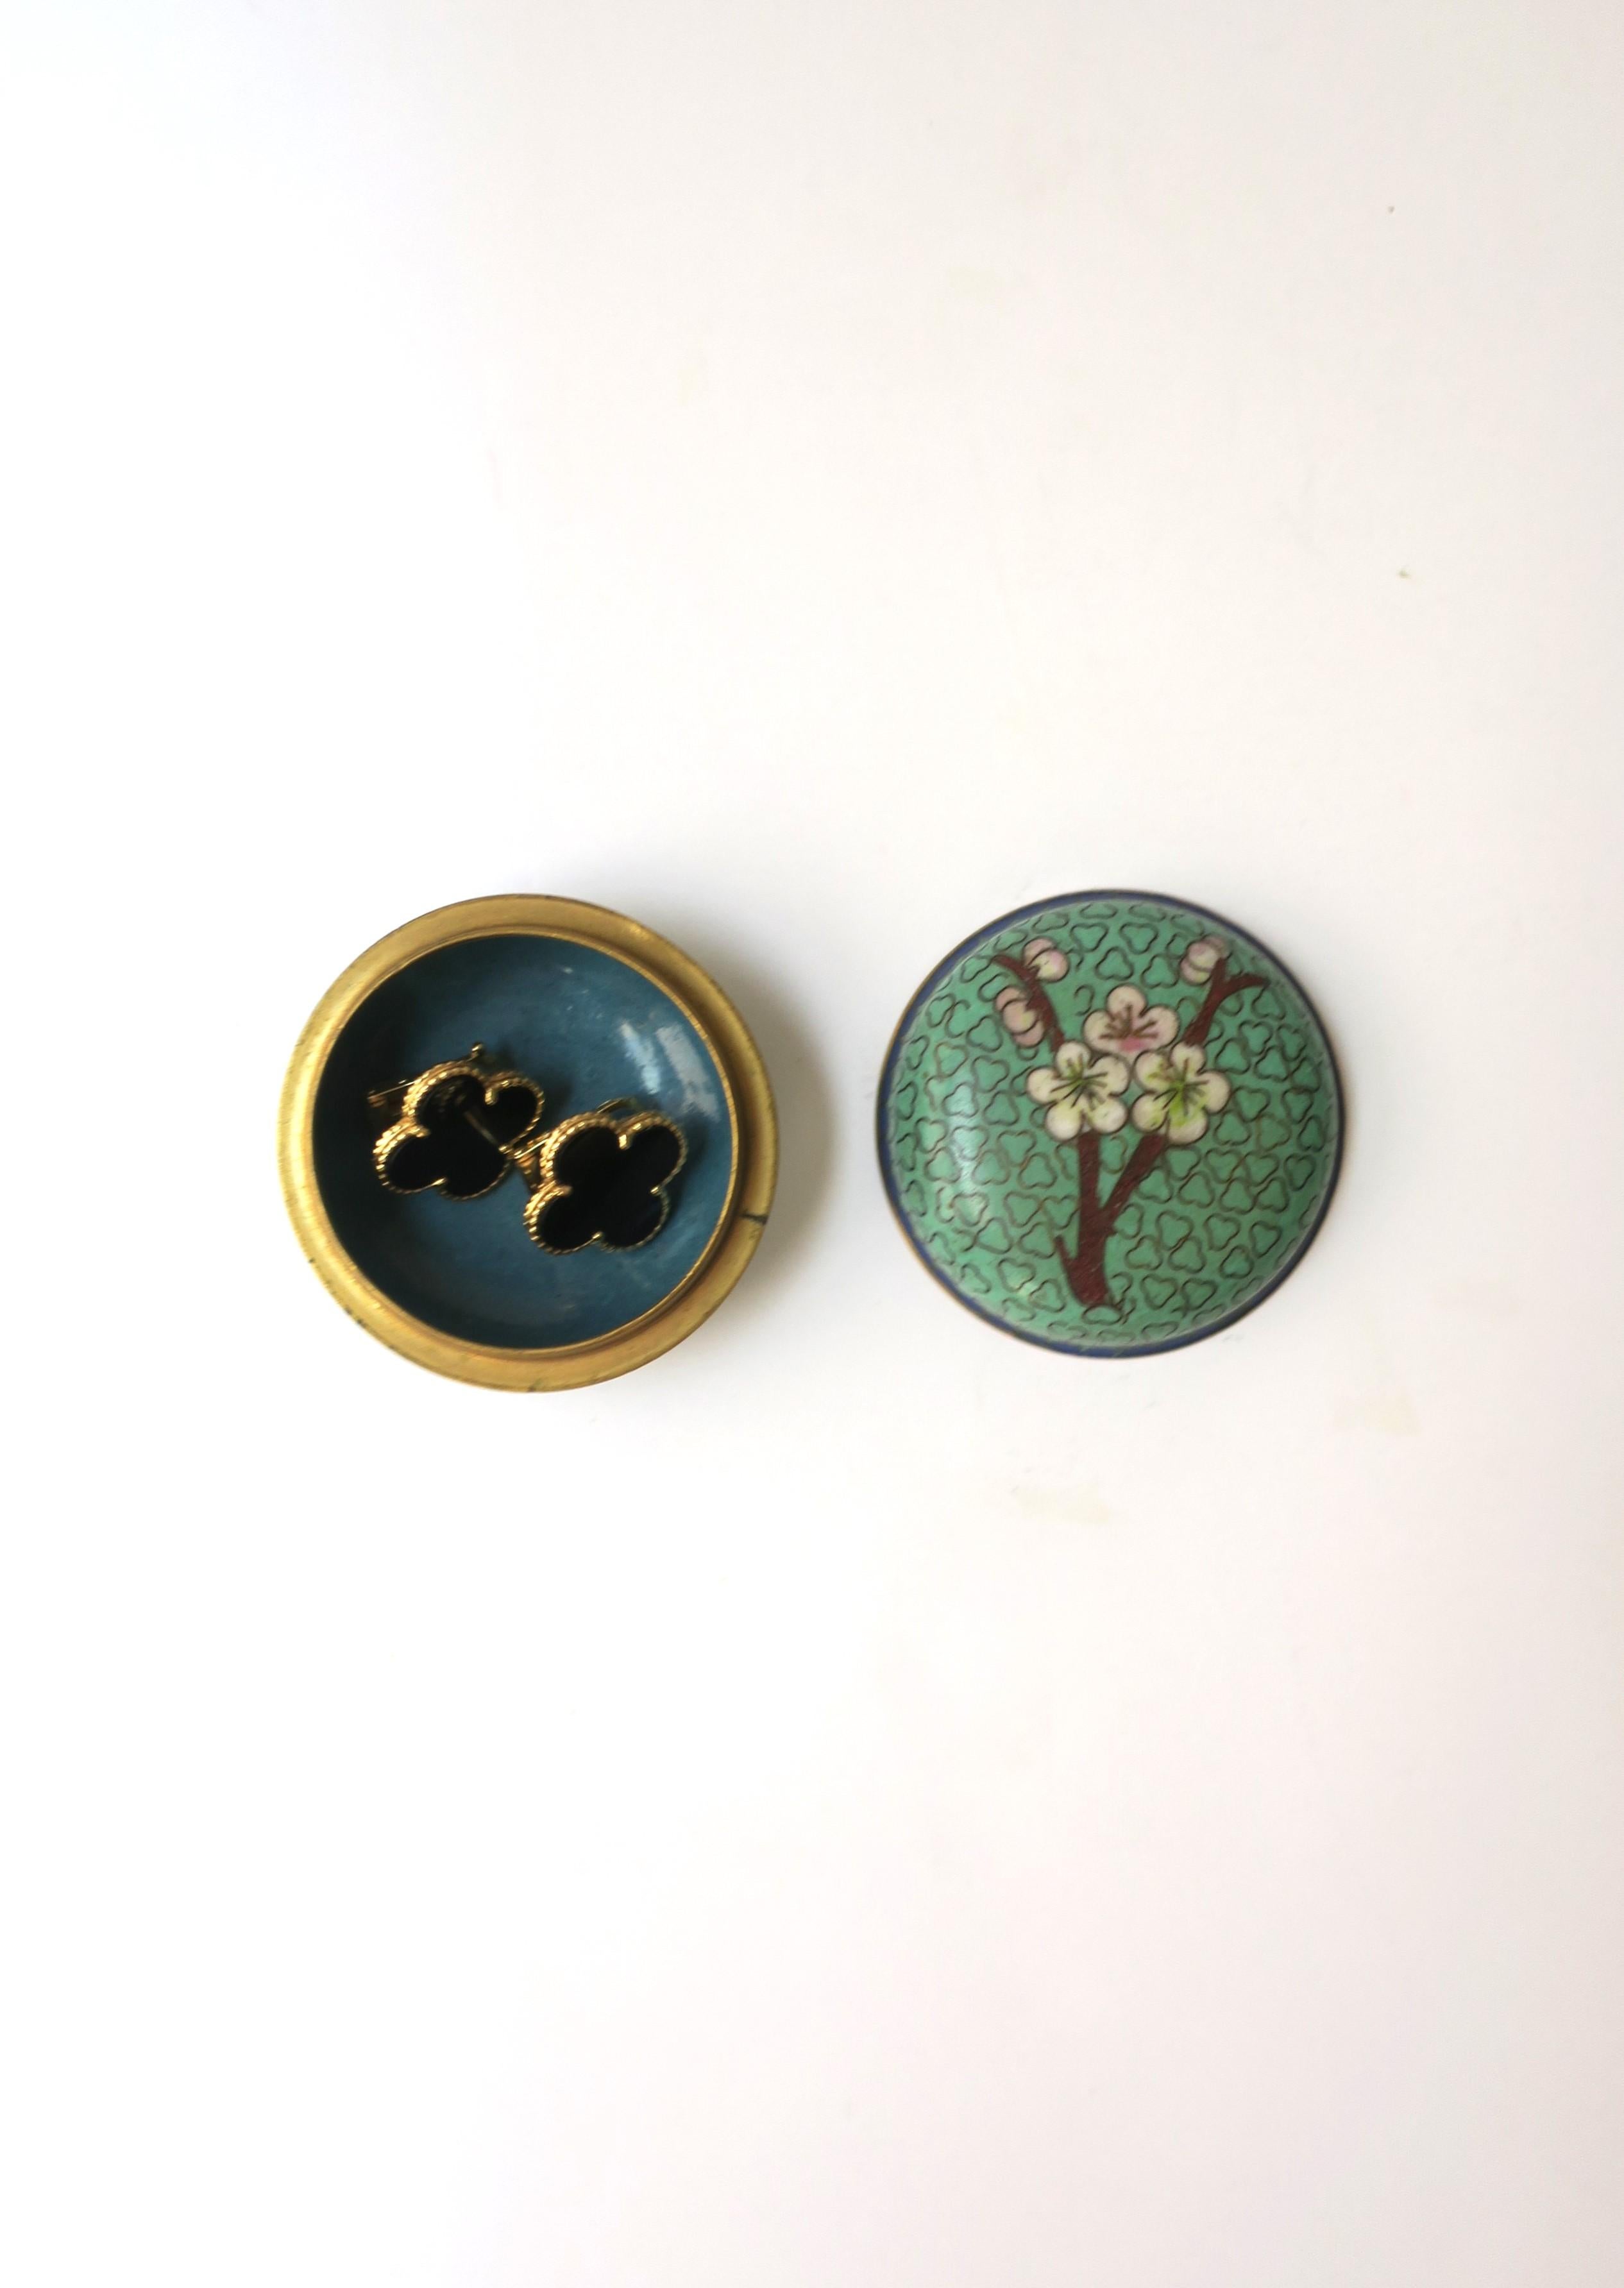 Brass Cloisonne Enamel Box with Flowers Chinoiserie Style